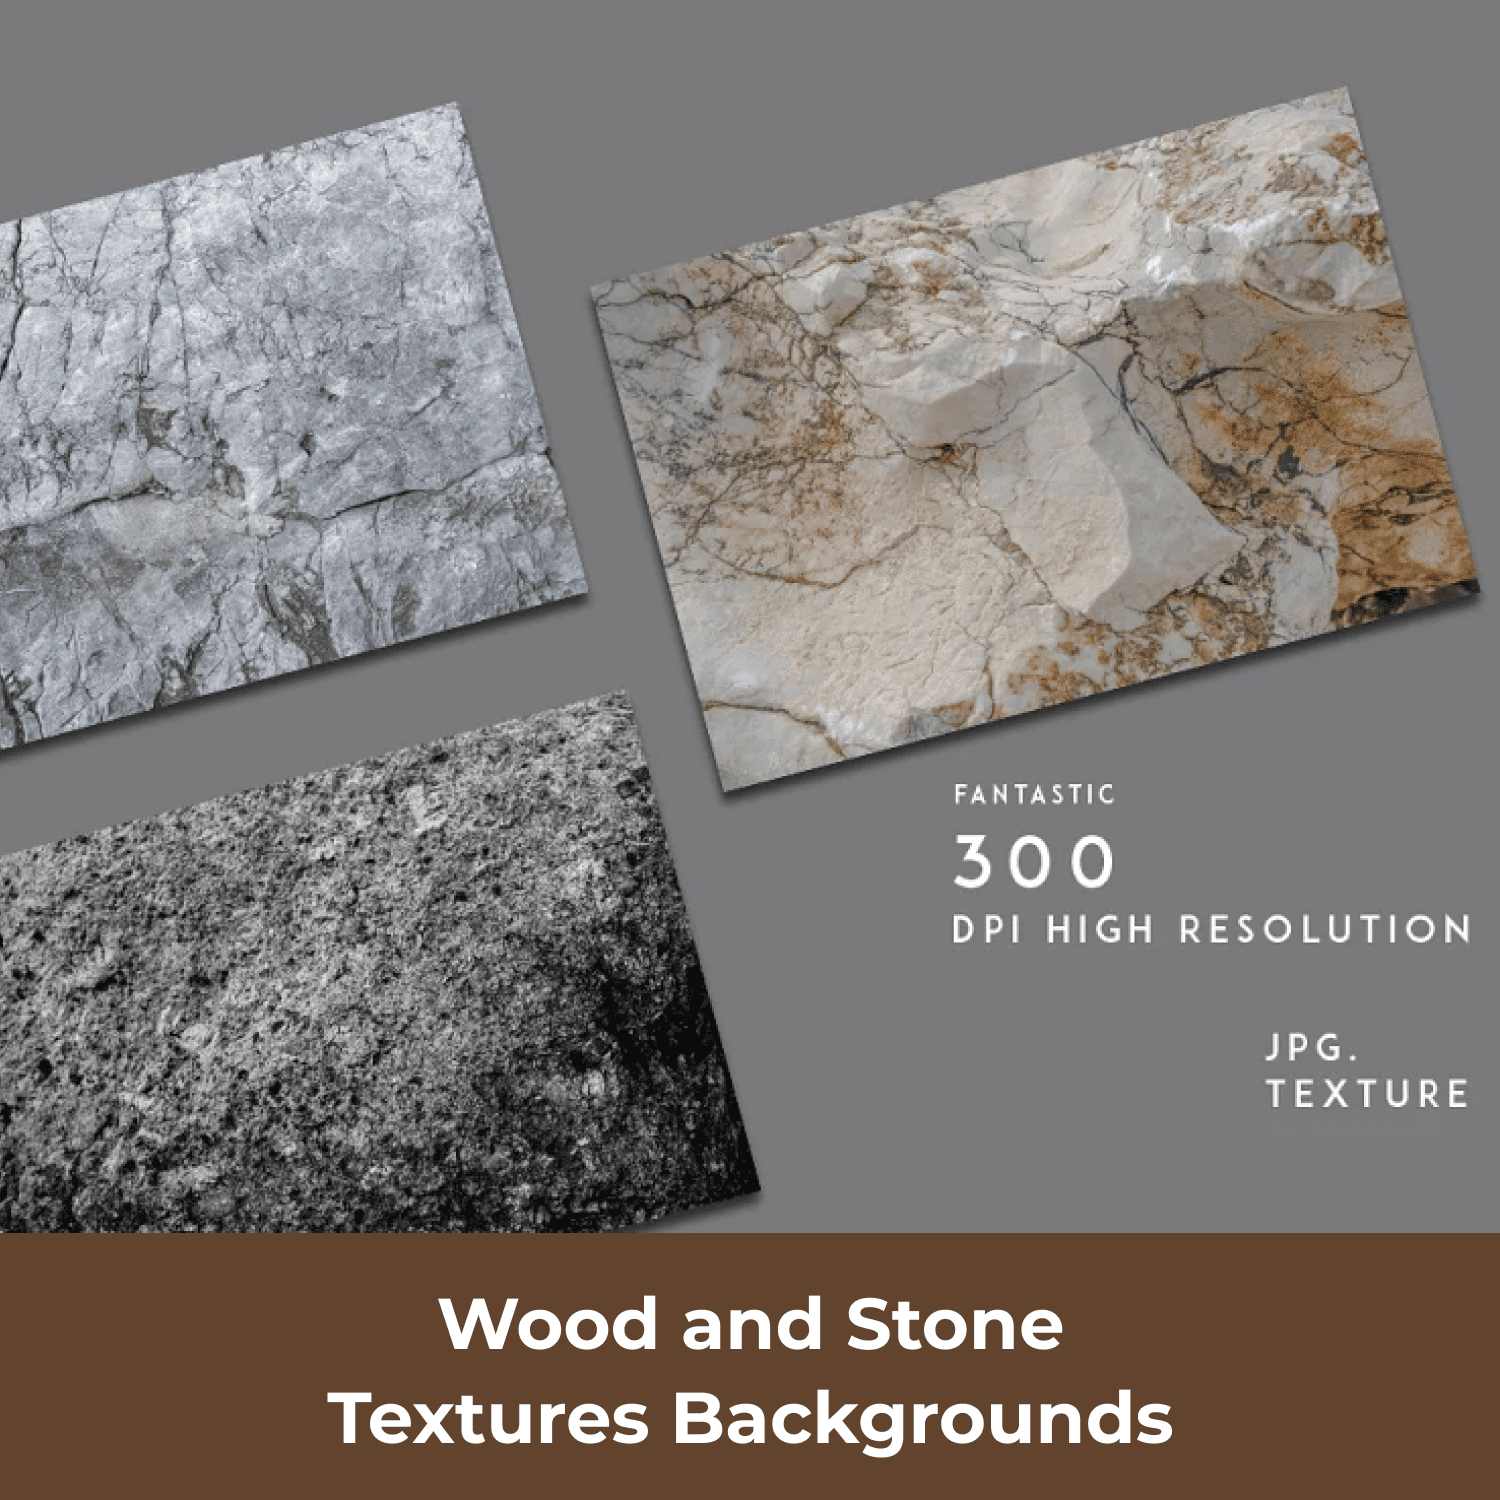 Wood and Stone Textures Backgrounds cover.